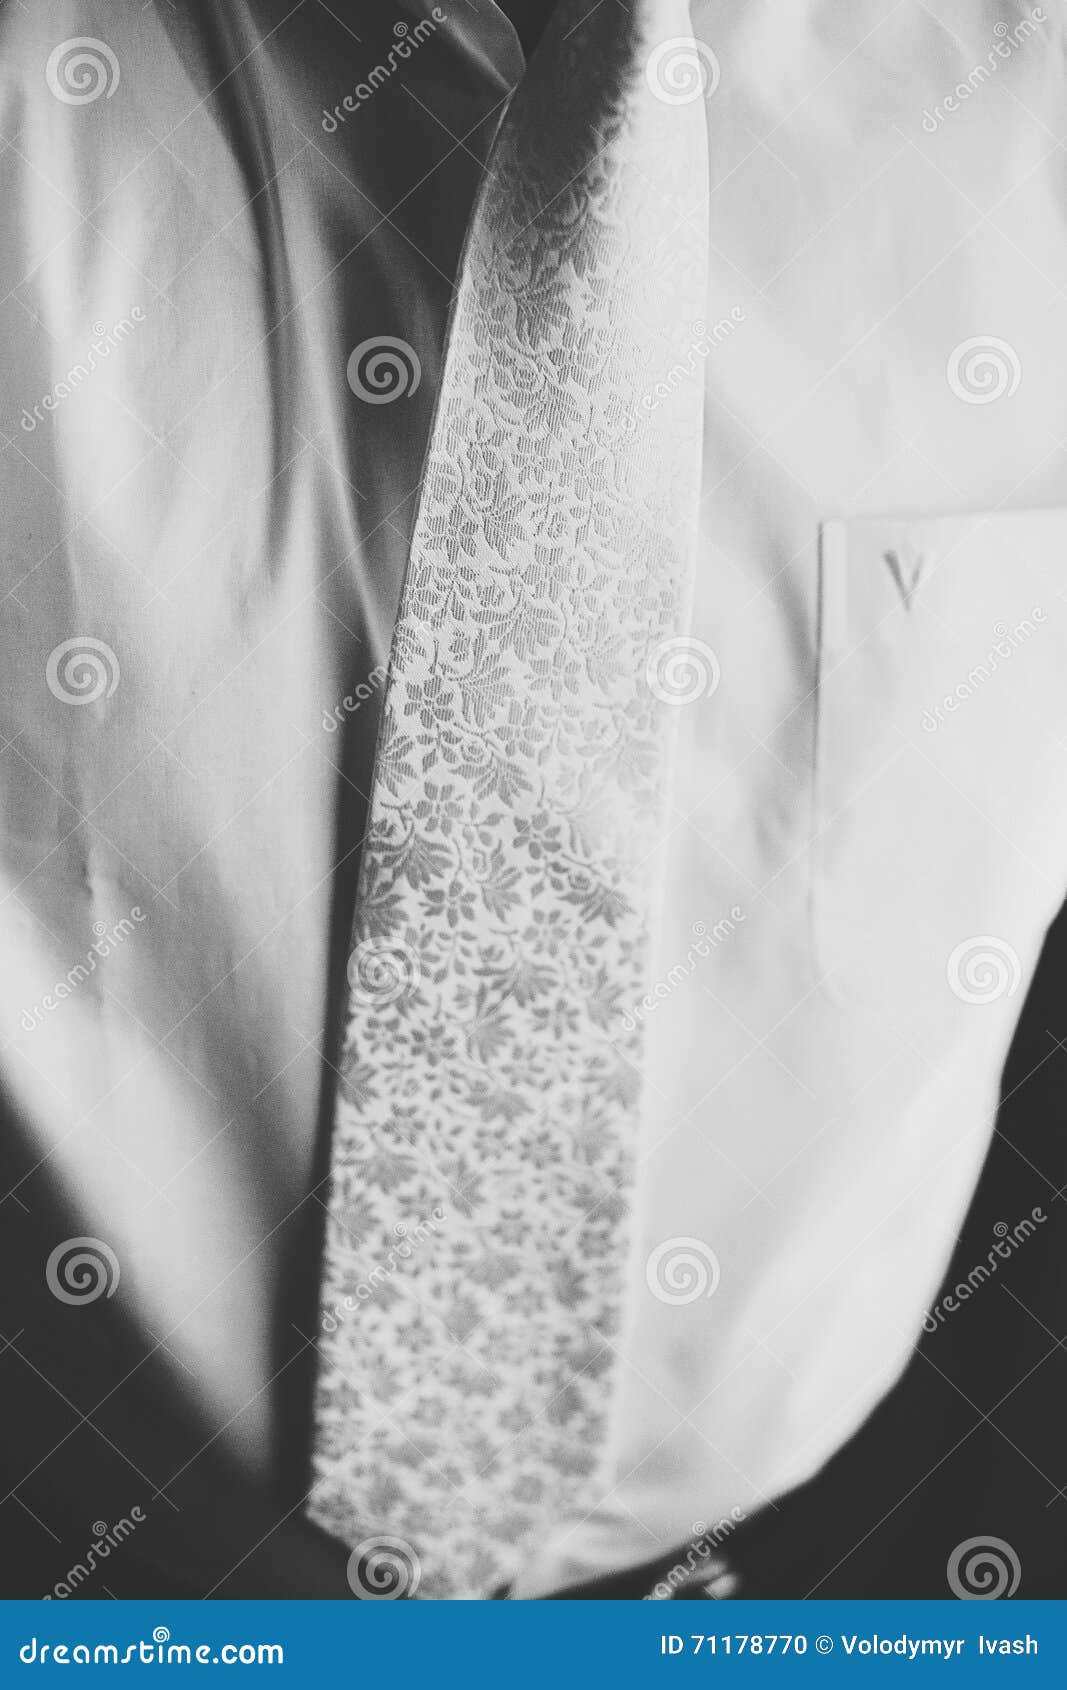 man wears a white tie with a silver fowers over a white shirt